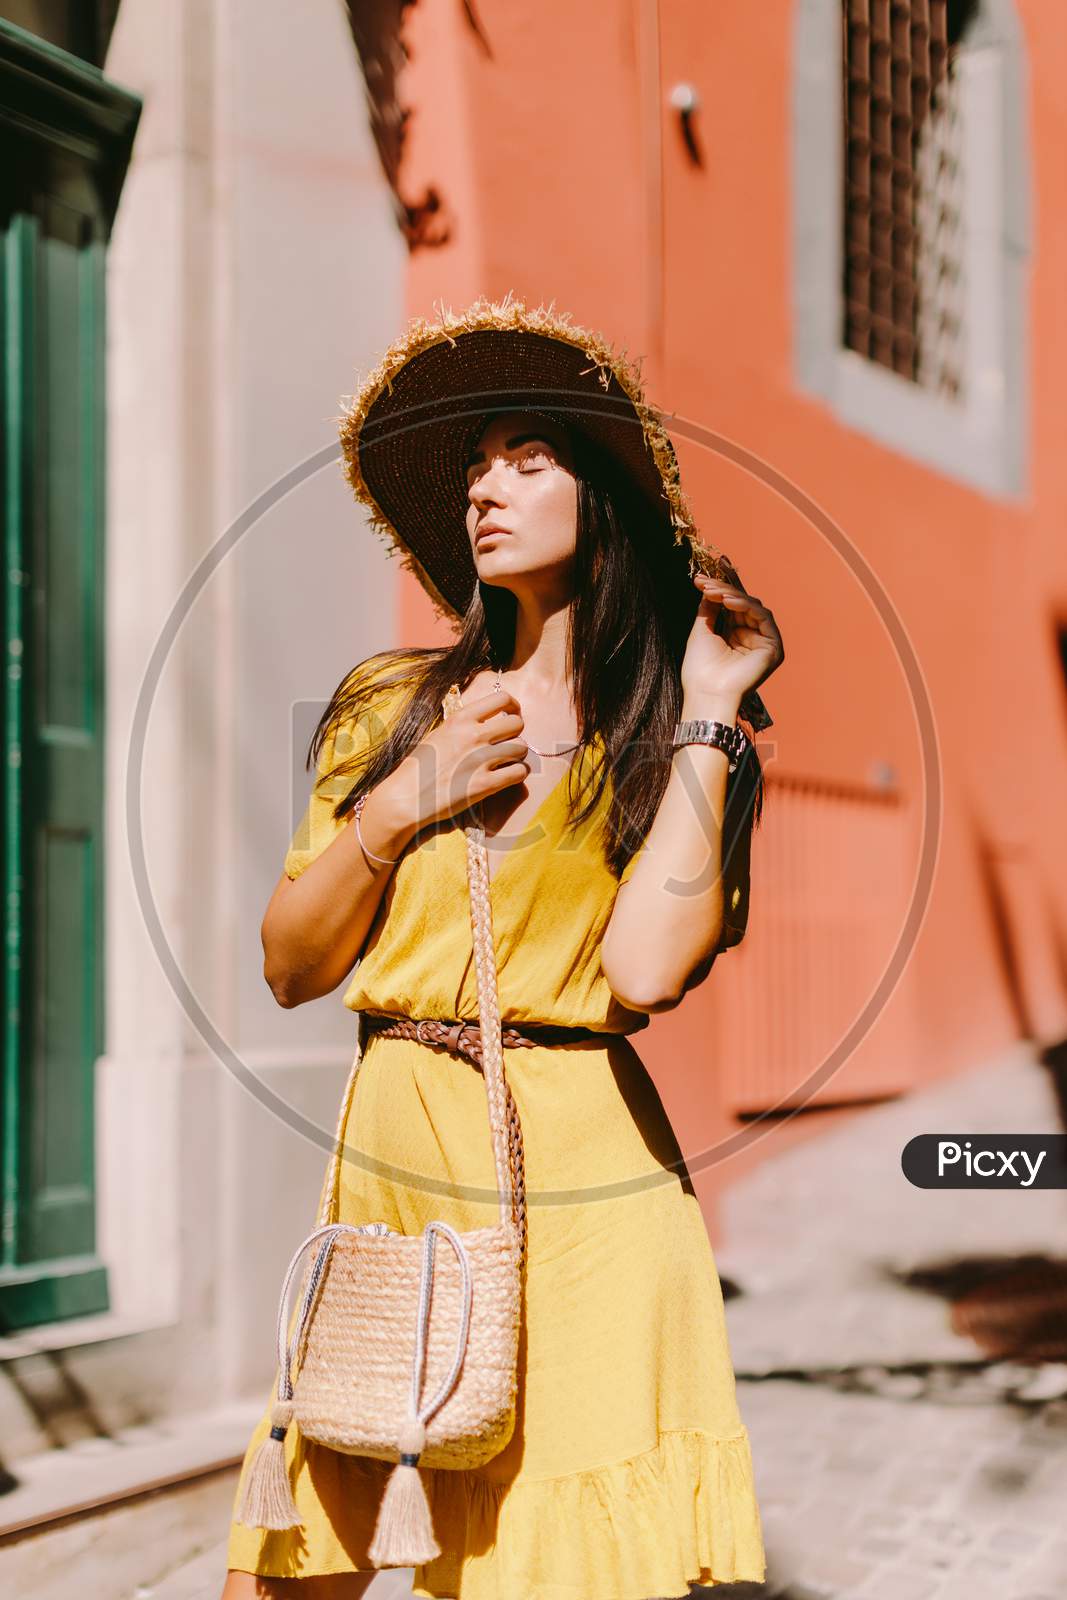 Attractive Woman In Summer Dress And Straw Hat With Handbag Walking